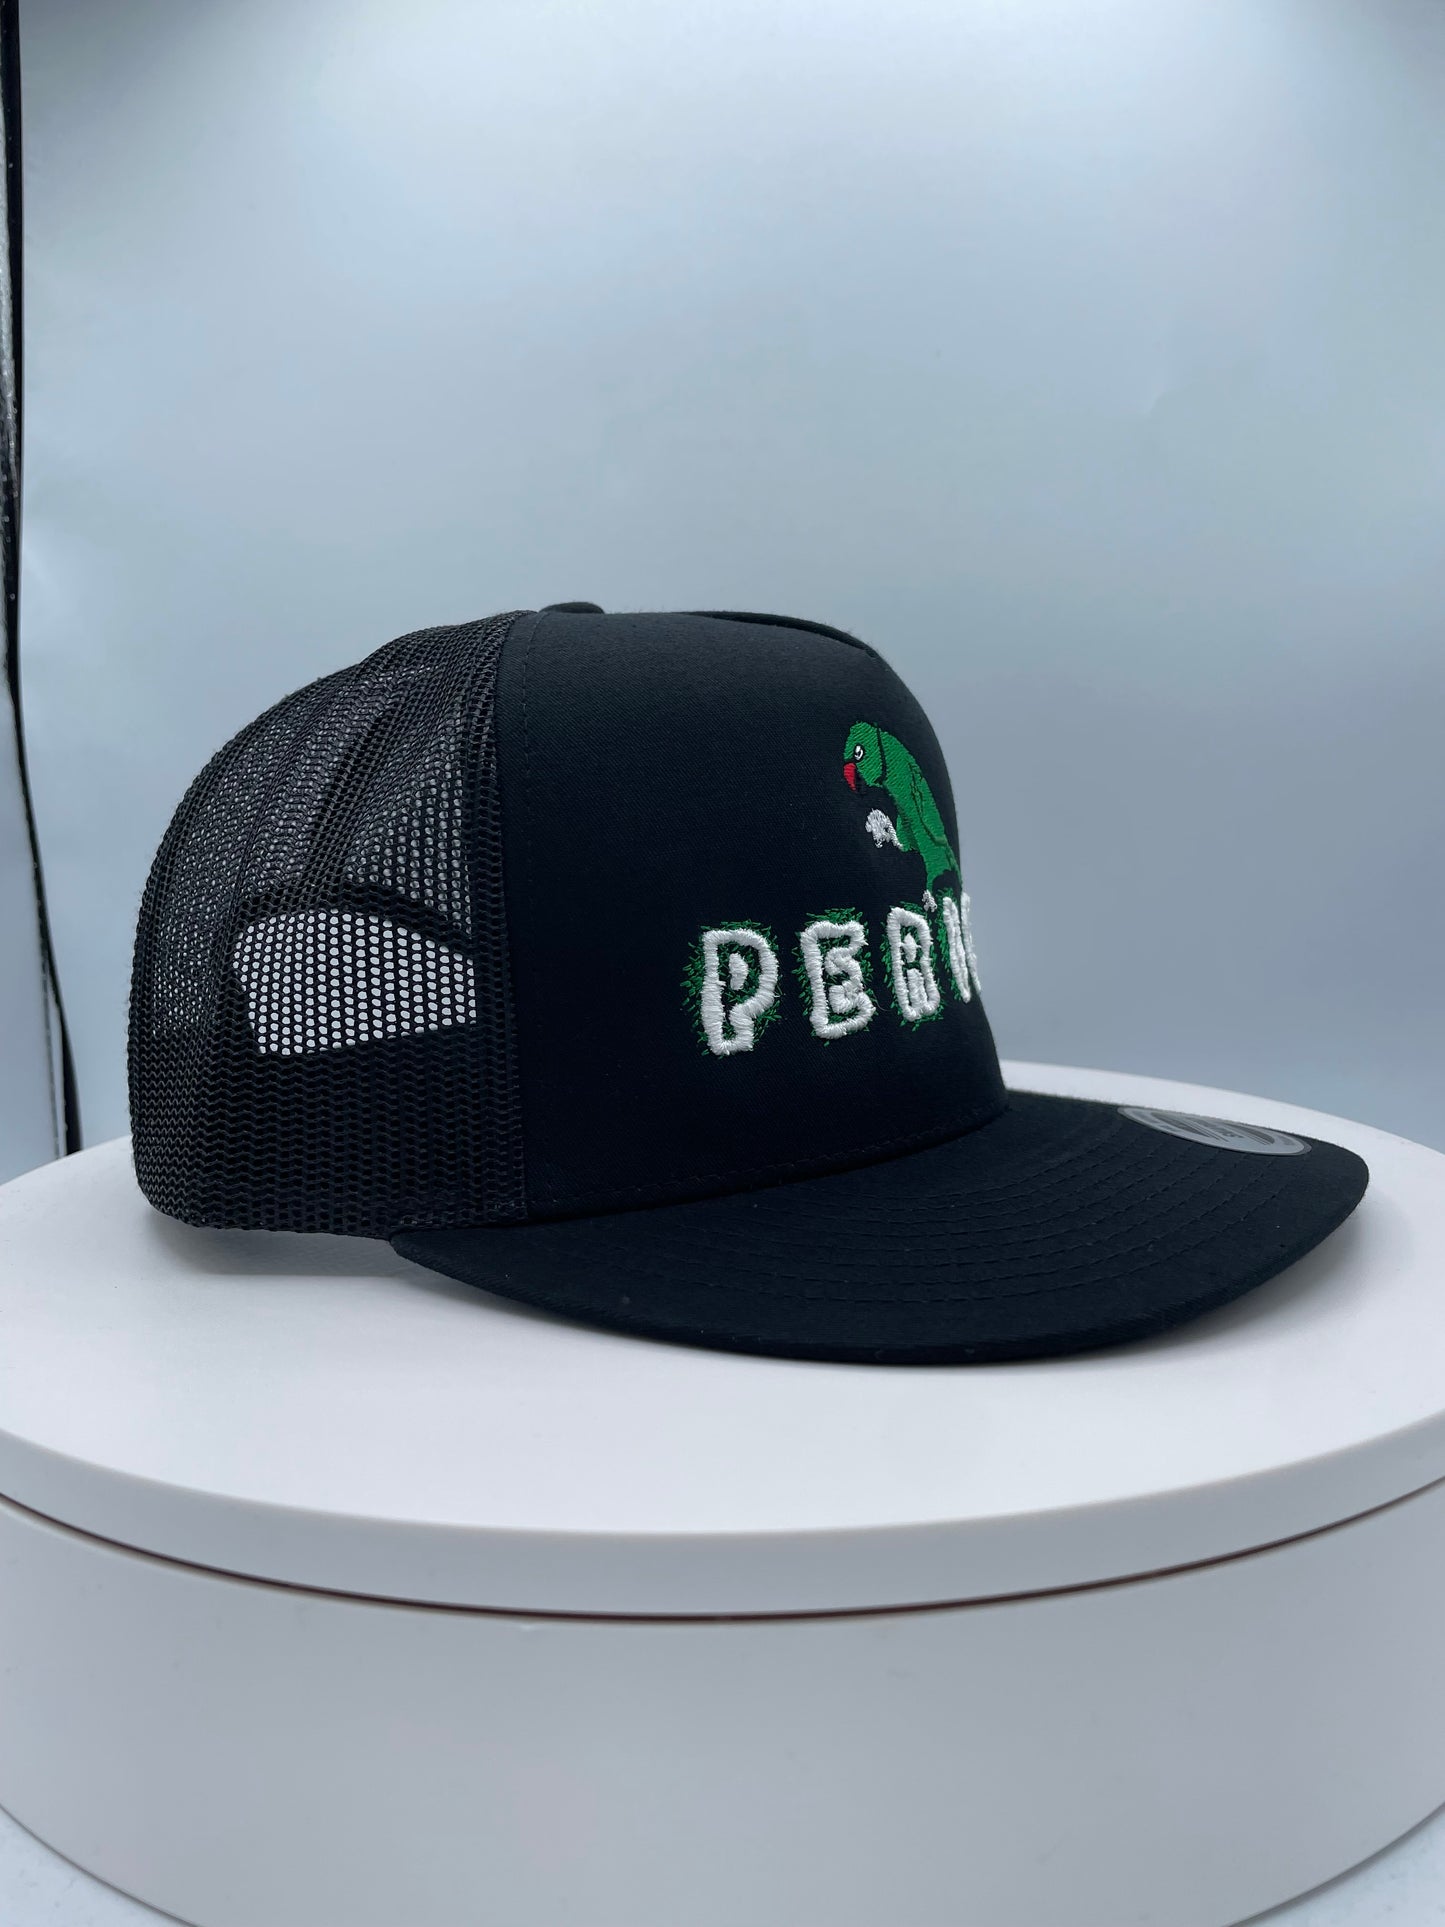 Perico Puff Embroidery Trucker hat.